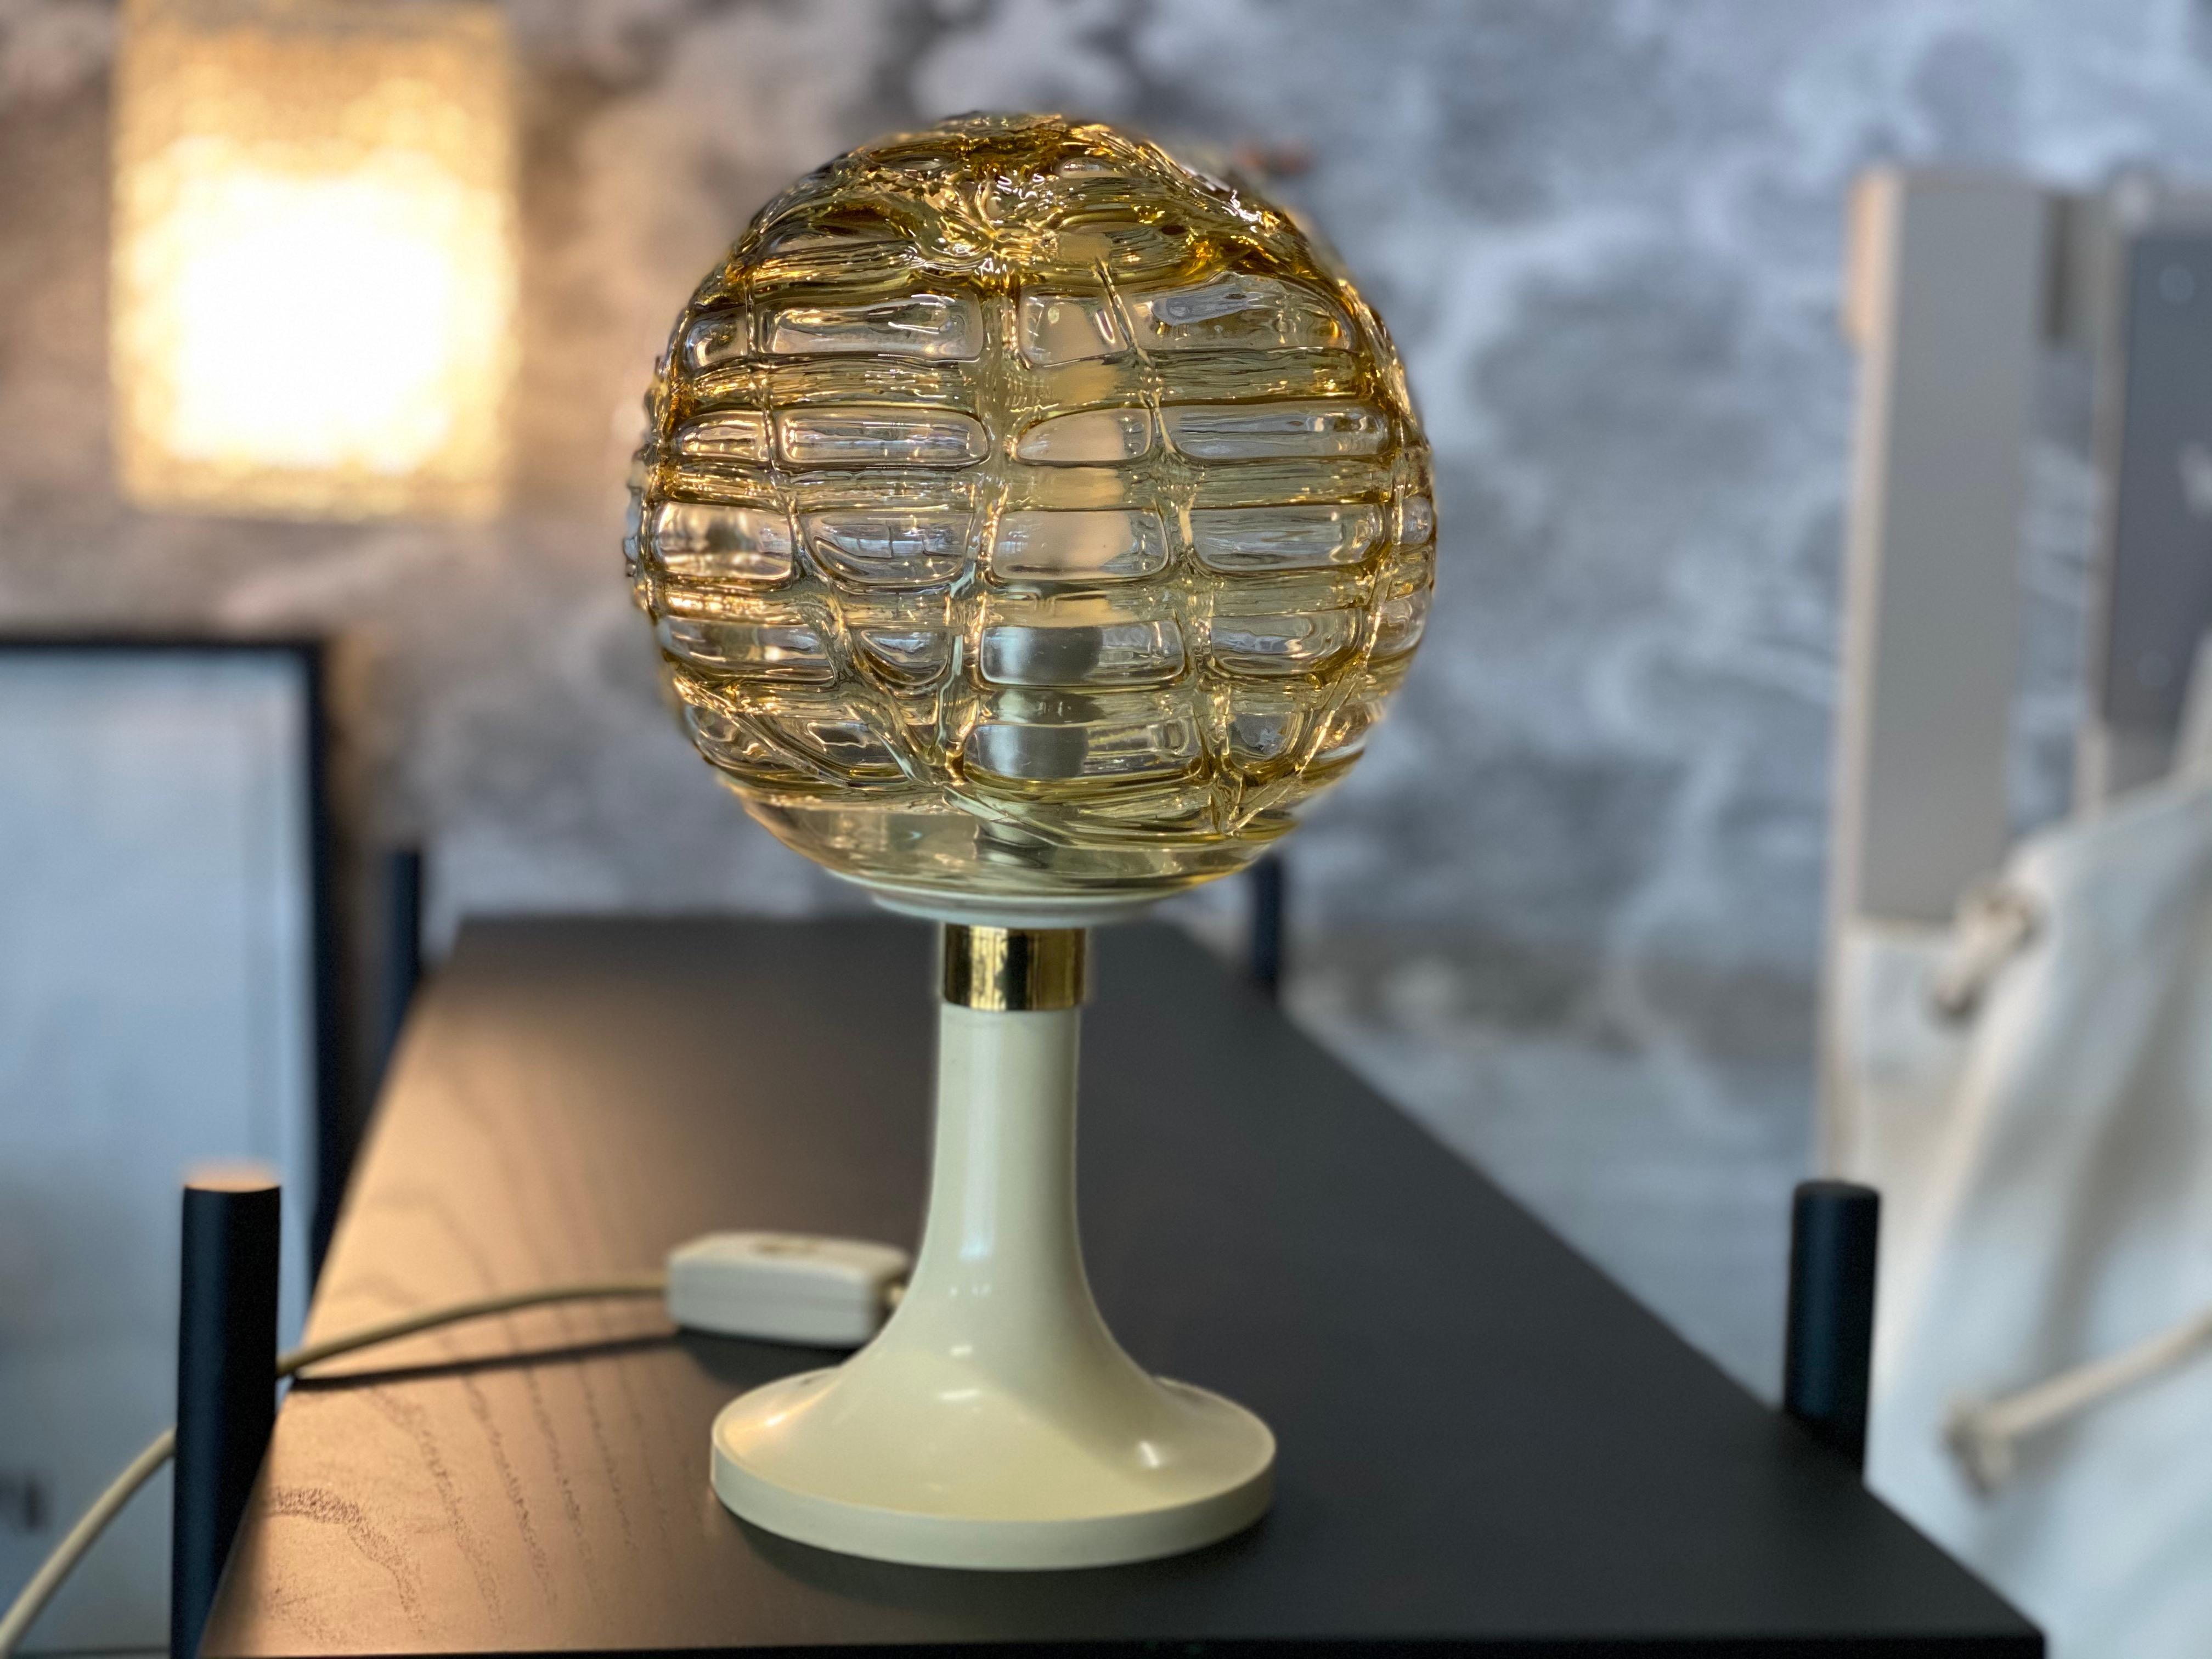 This table lamp is from the company 